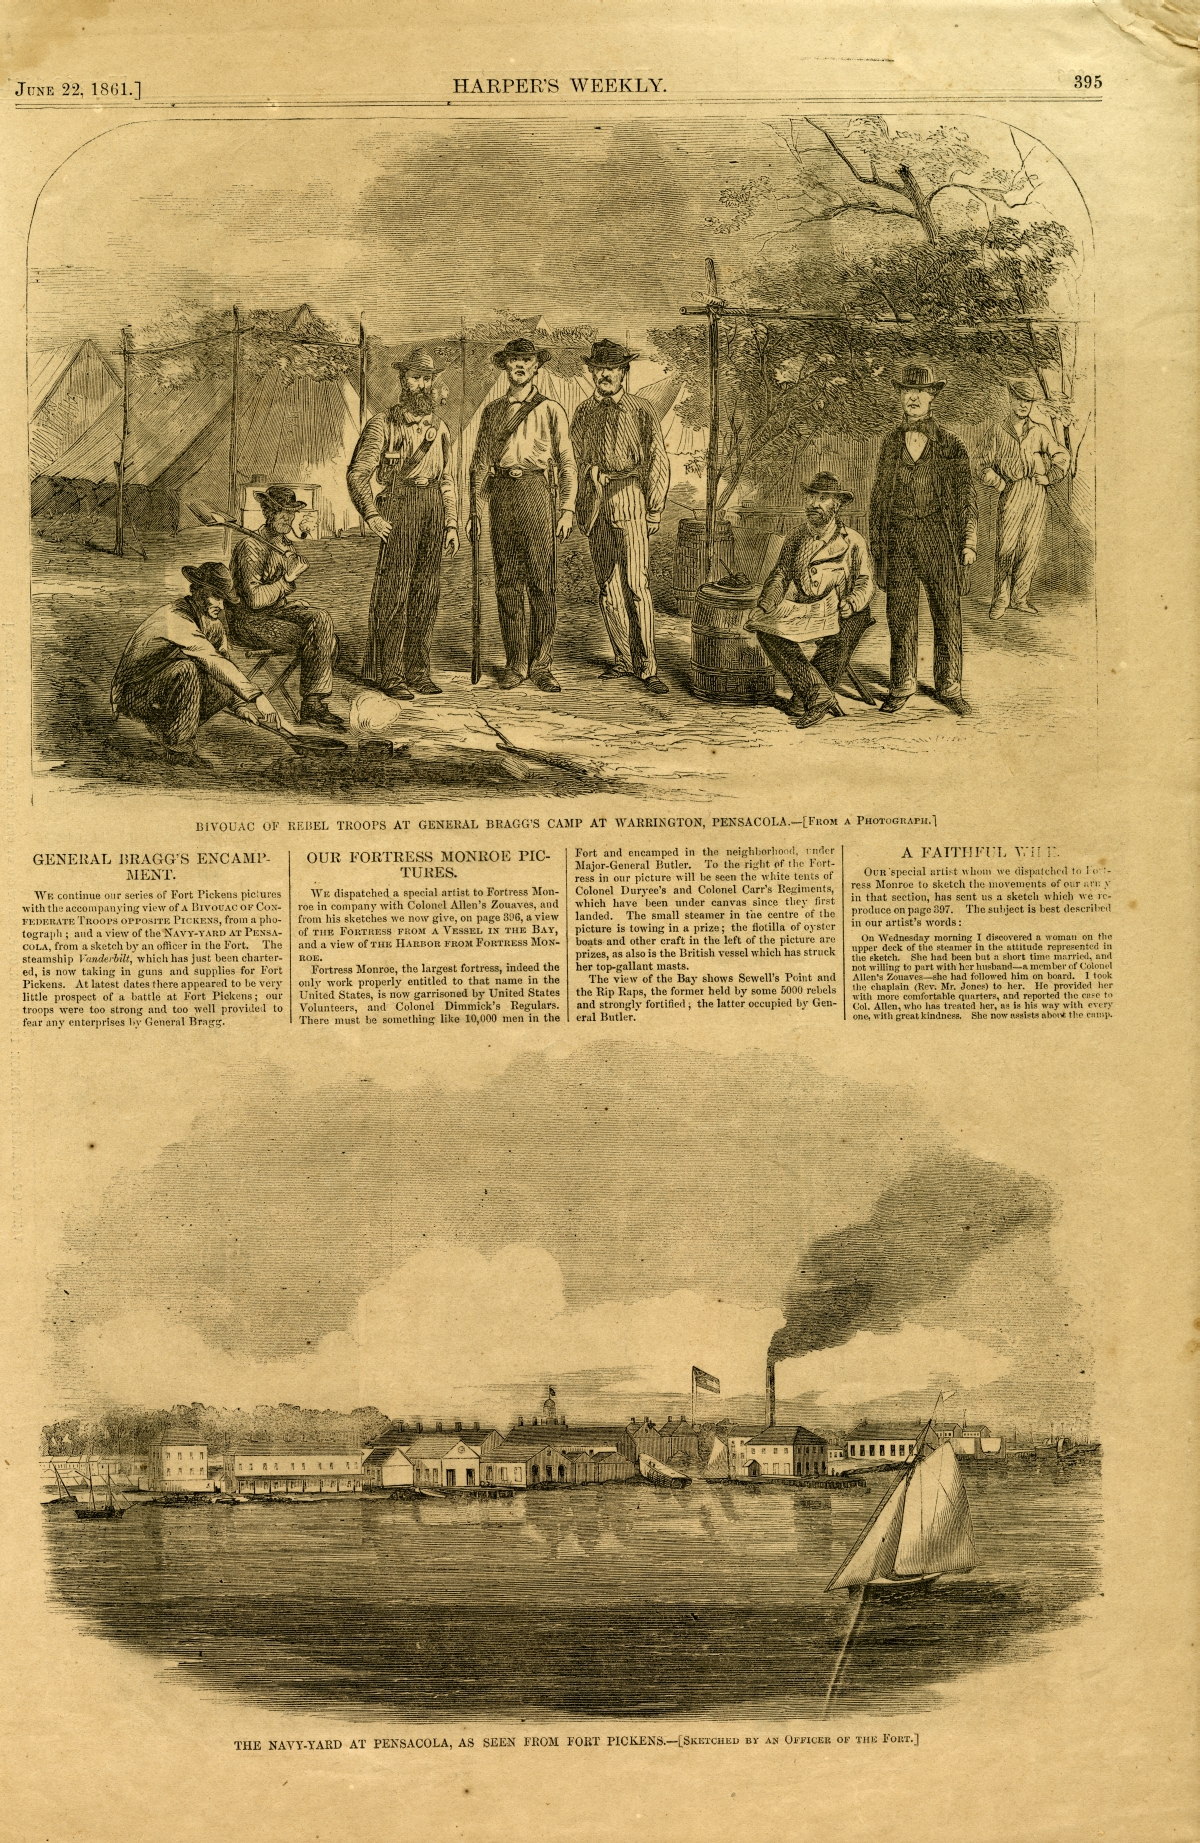 Harper’s Weekly print of war scenes in Pensacola, 1861. Confederate soldiers in camp (top) and Navy yard (bottom).